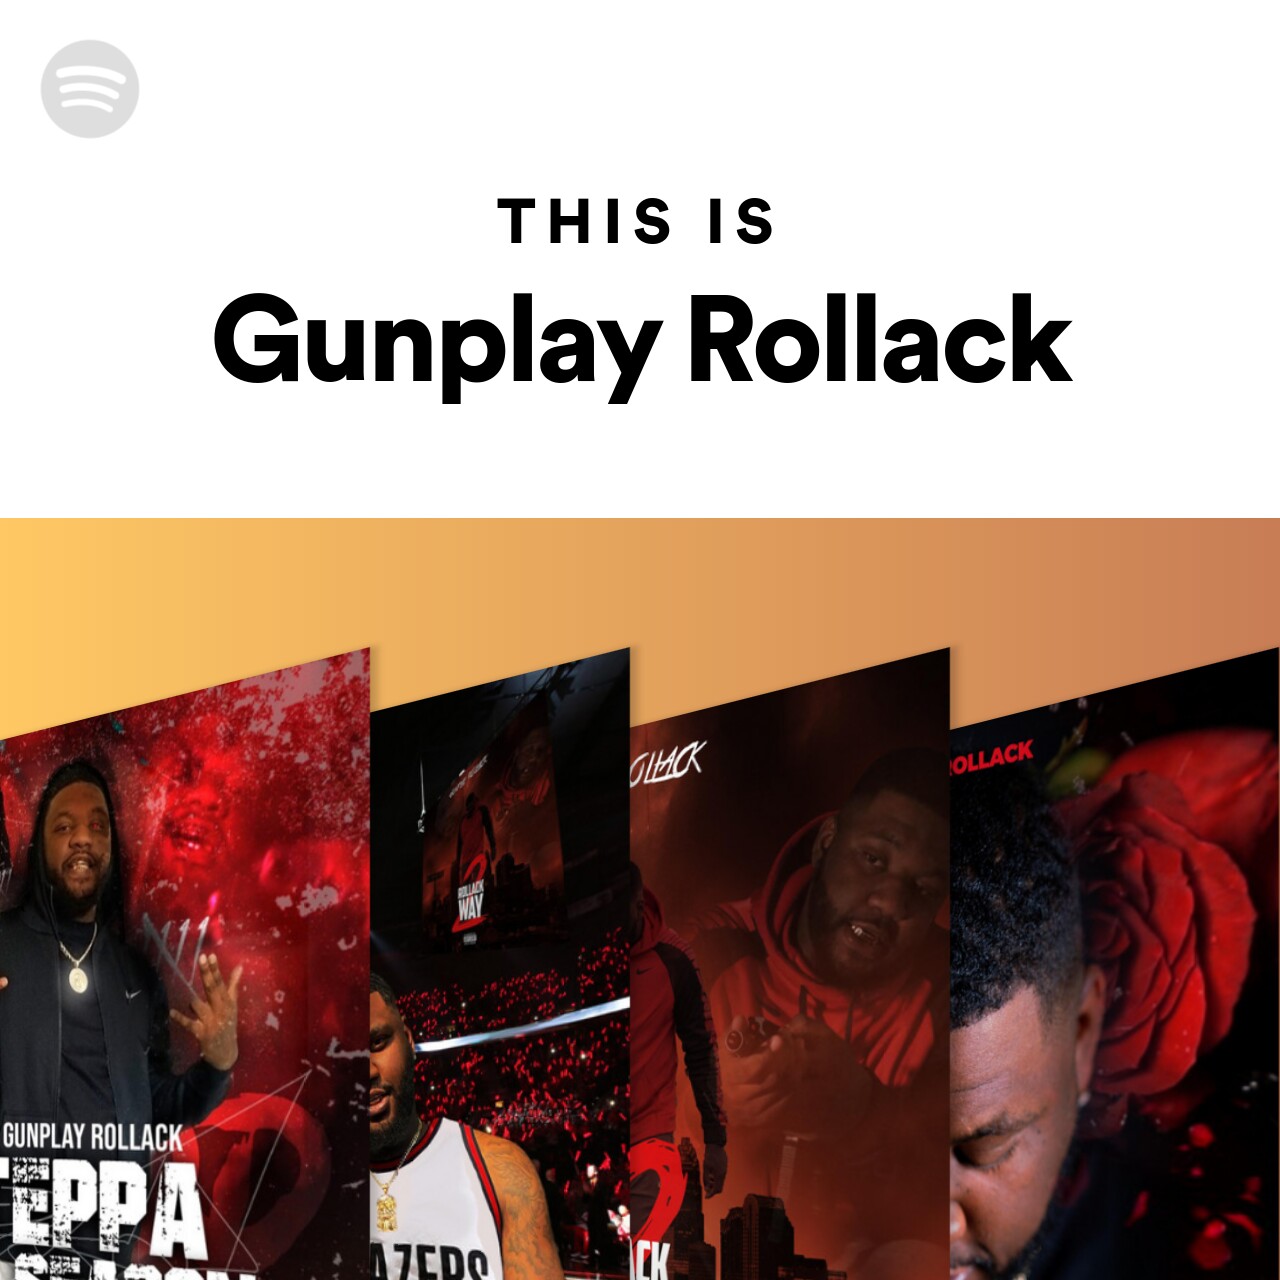 This Is Gunplay Rollack